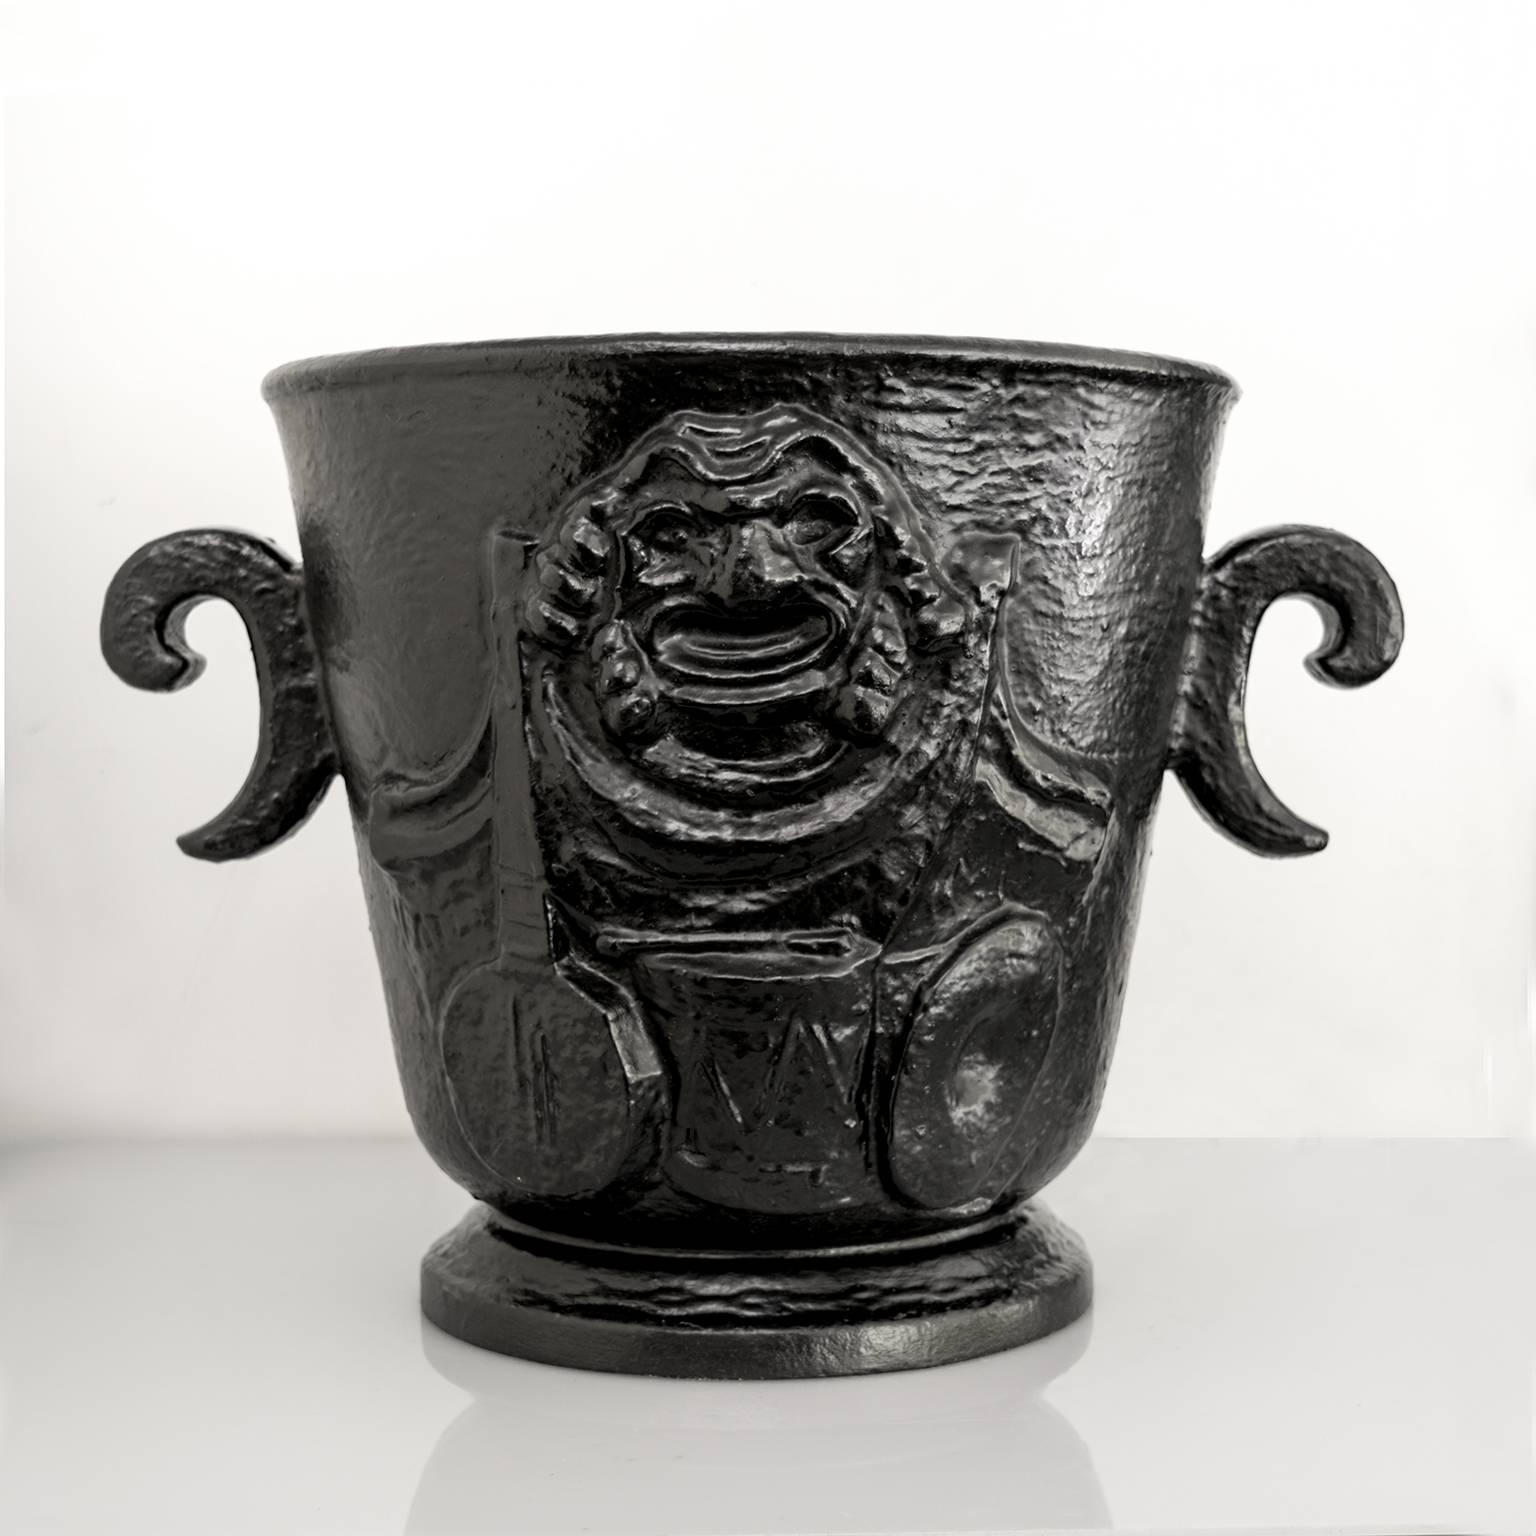 Scandinavian Modern  Näfveqvarns Bruk Cast Iron Leisure Urn In Excellent Condition For Sale In New York, NY